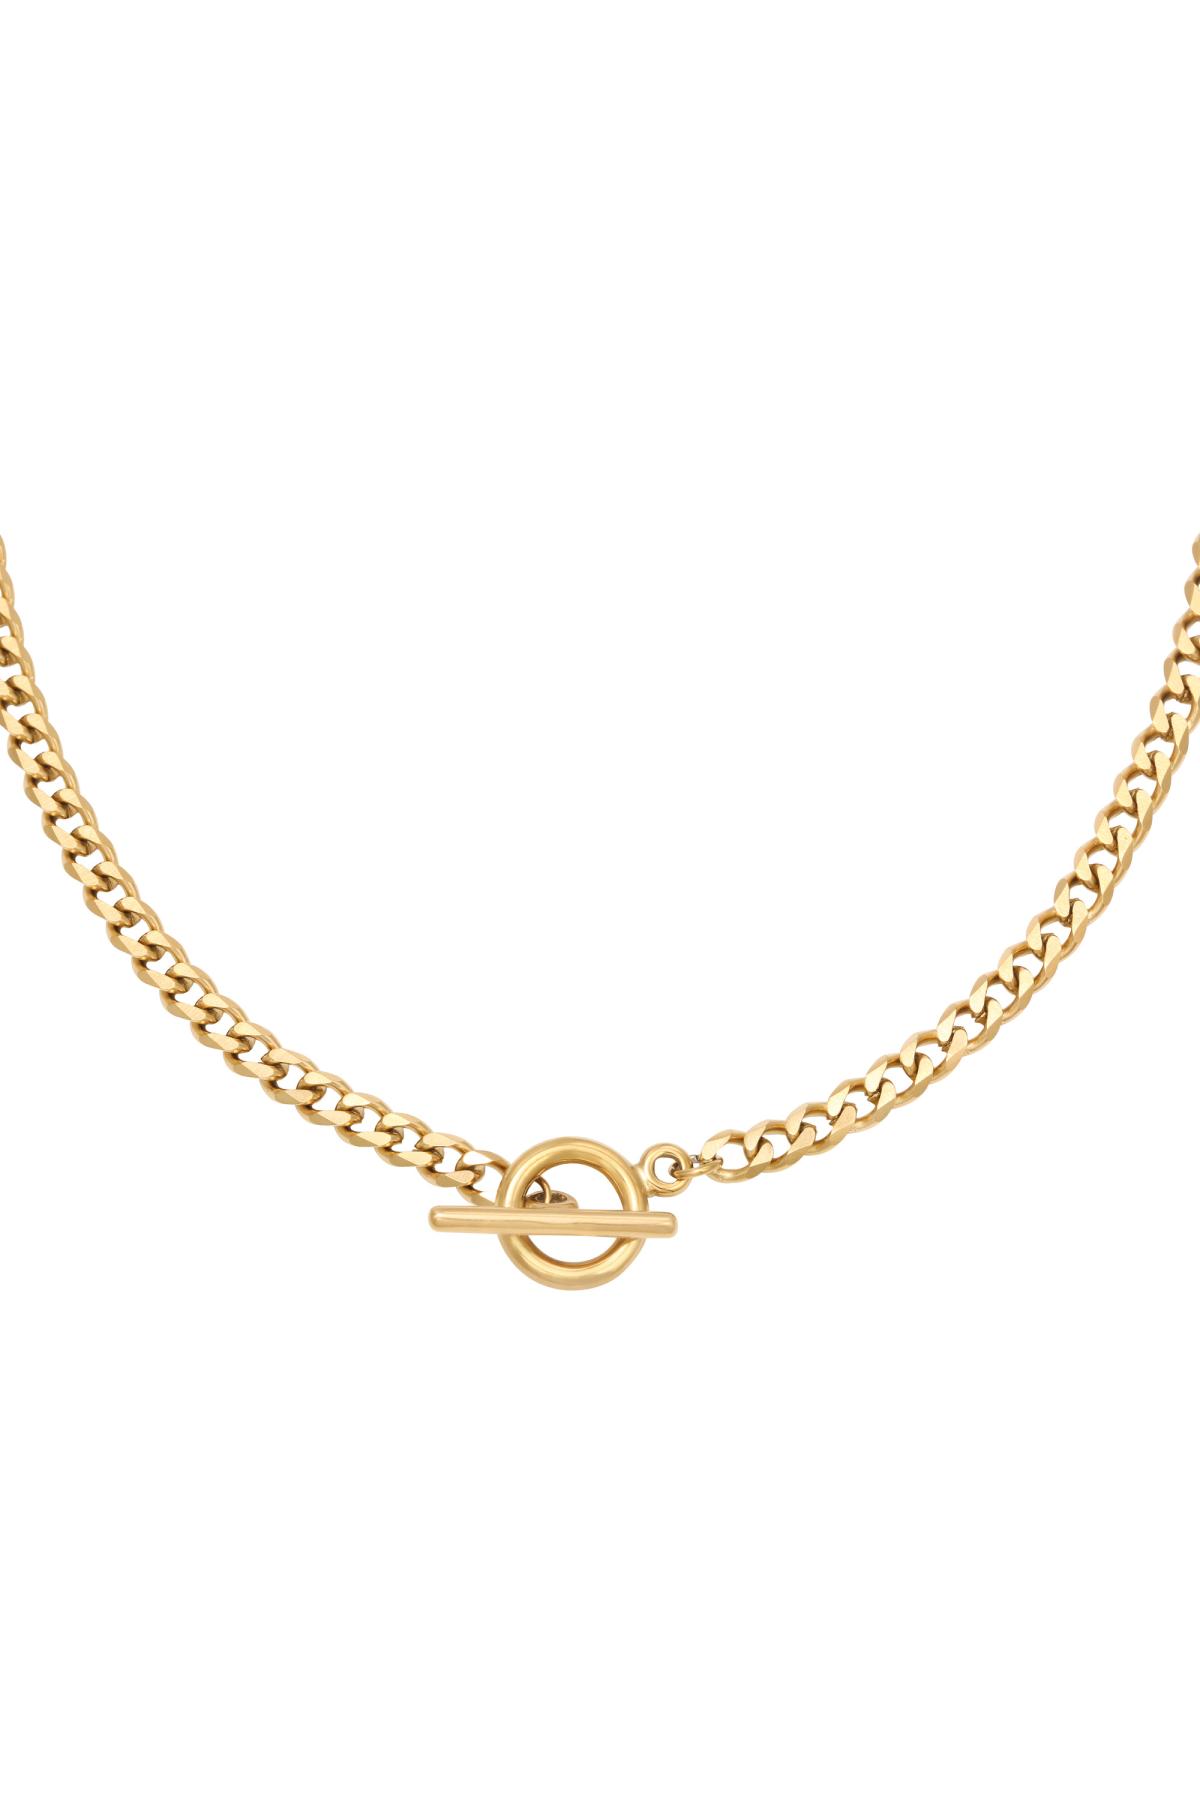 Necklace Chain Sanya Gold Stainless Steel 